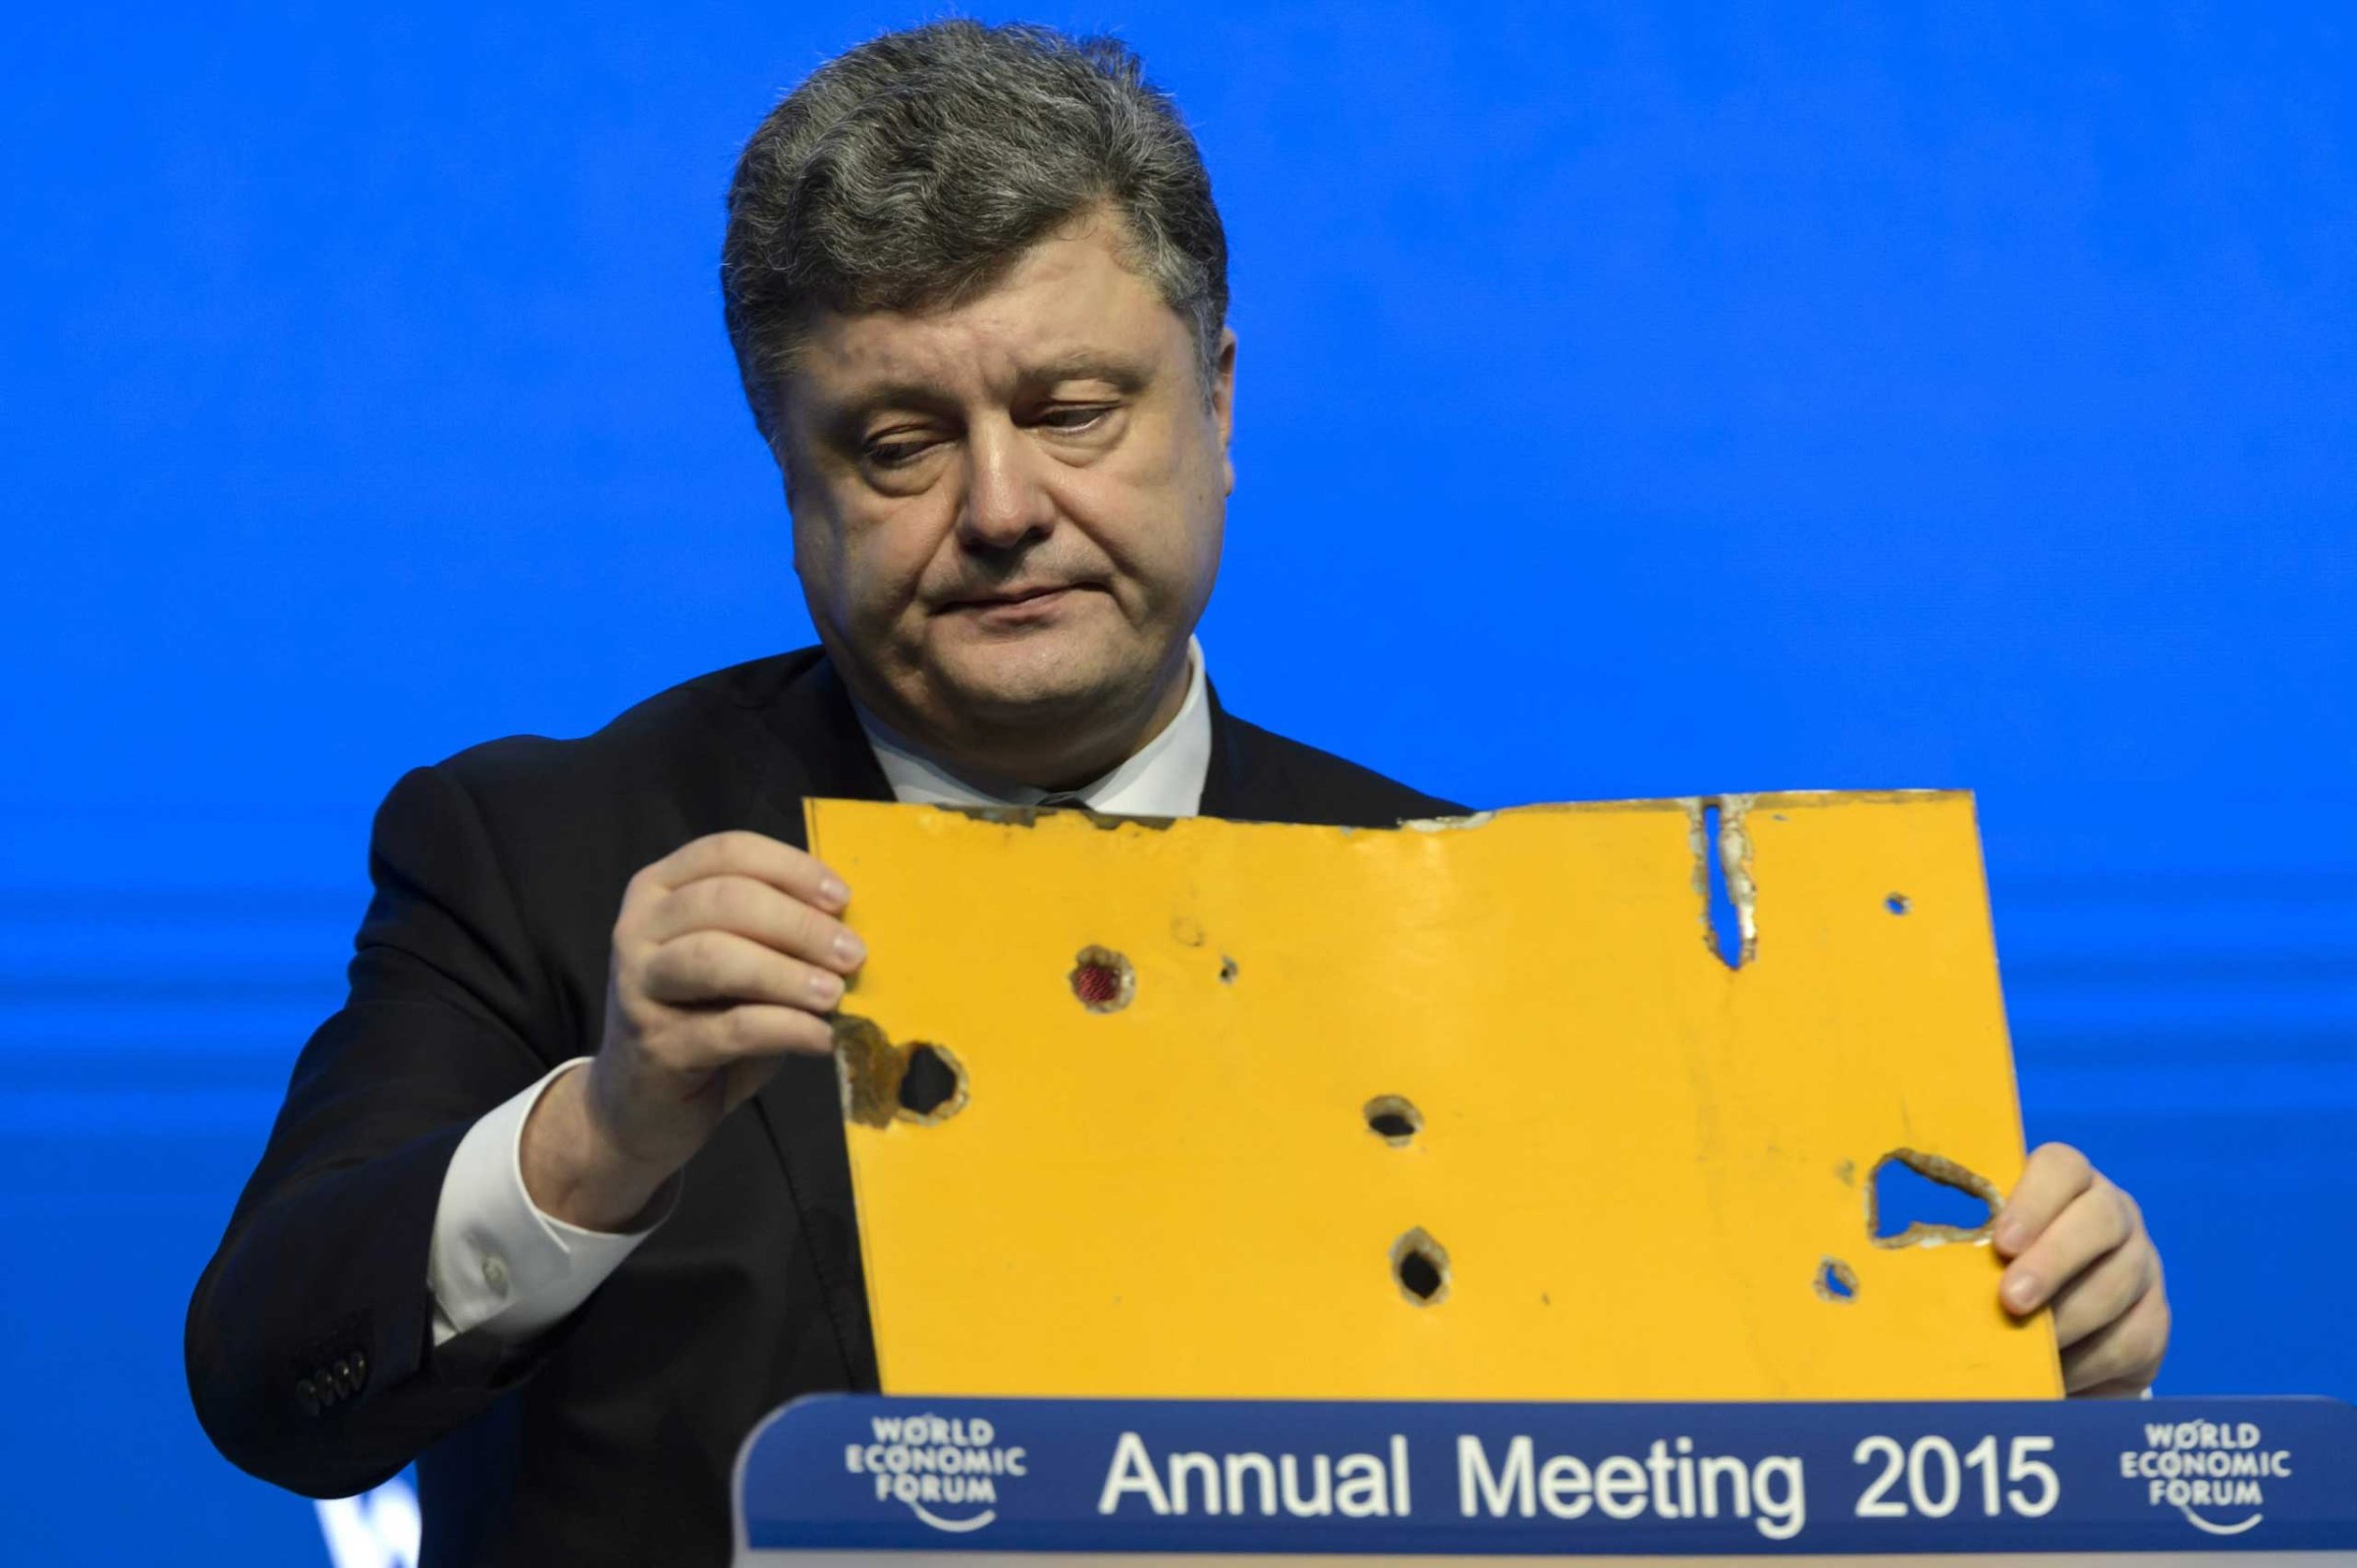 The president of Ukraine Petro Poroshenko speaks with a piece of a damaged passenger bus hit by a shell that killed twelve passengers and injured 13 others at a Ukrainian military checkpoint near the town of Volnovakha, during a panel session on the first day of the 45th Annual Meeting of the World Economic Forum, WEF, in Davos, Jan. 21, 2015.